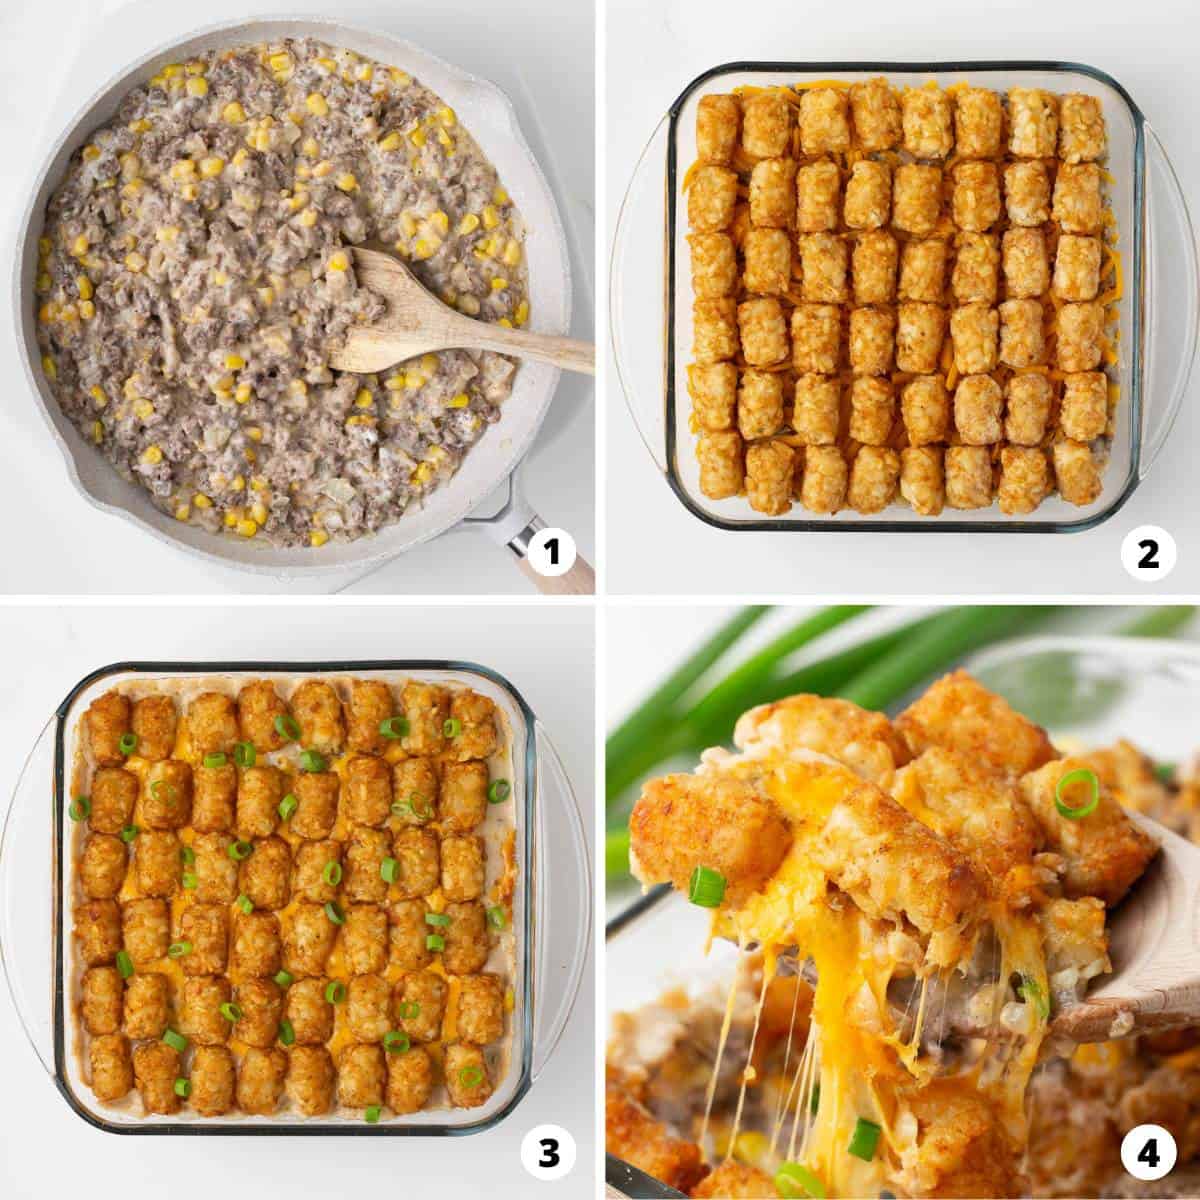 Showing how to make tater tot casserole in a 4 step collage.